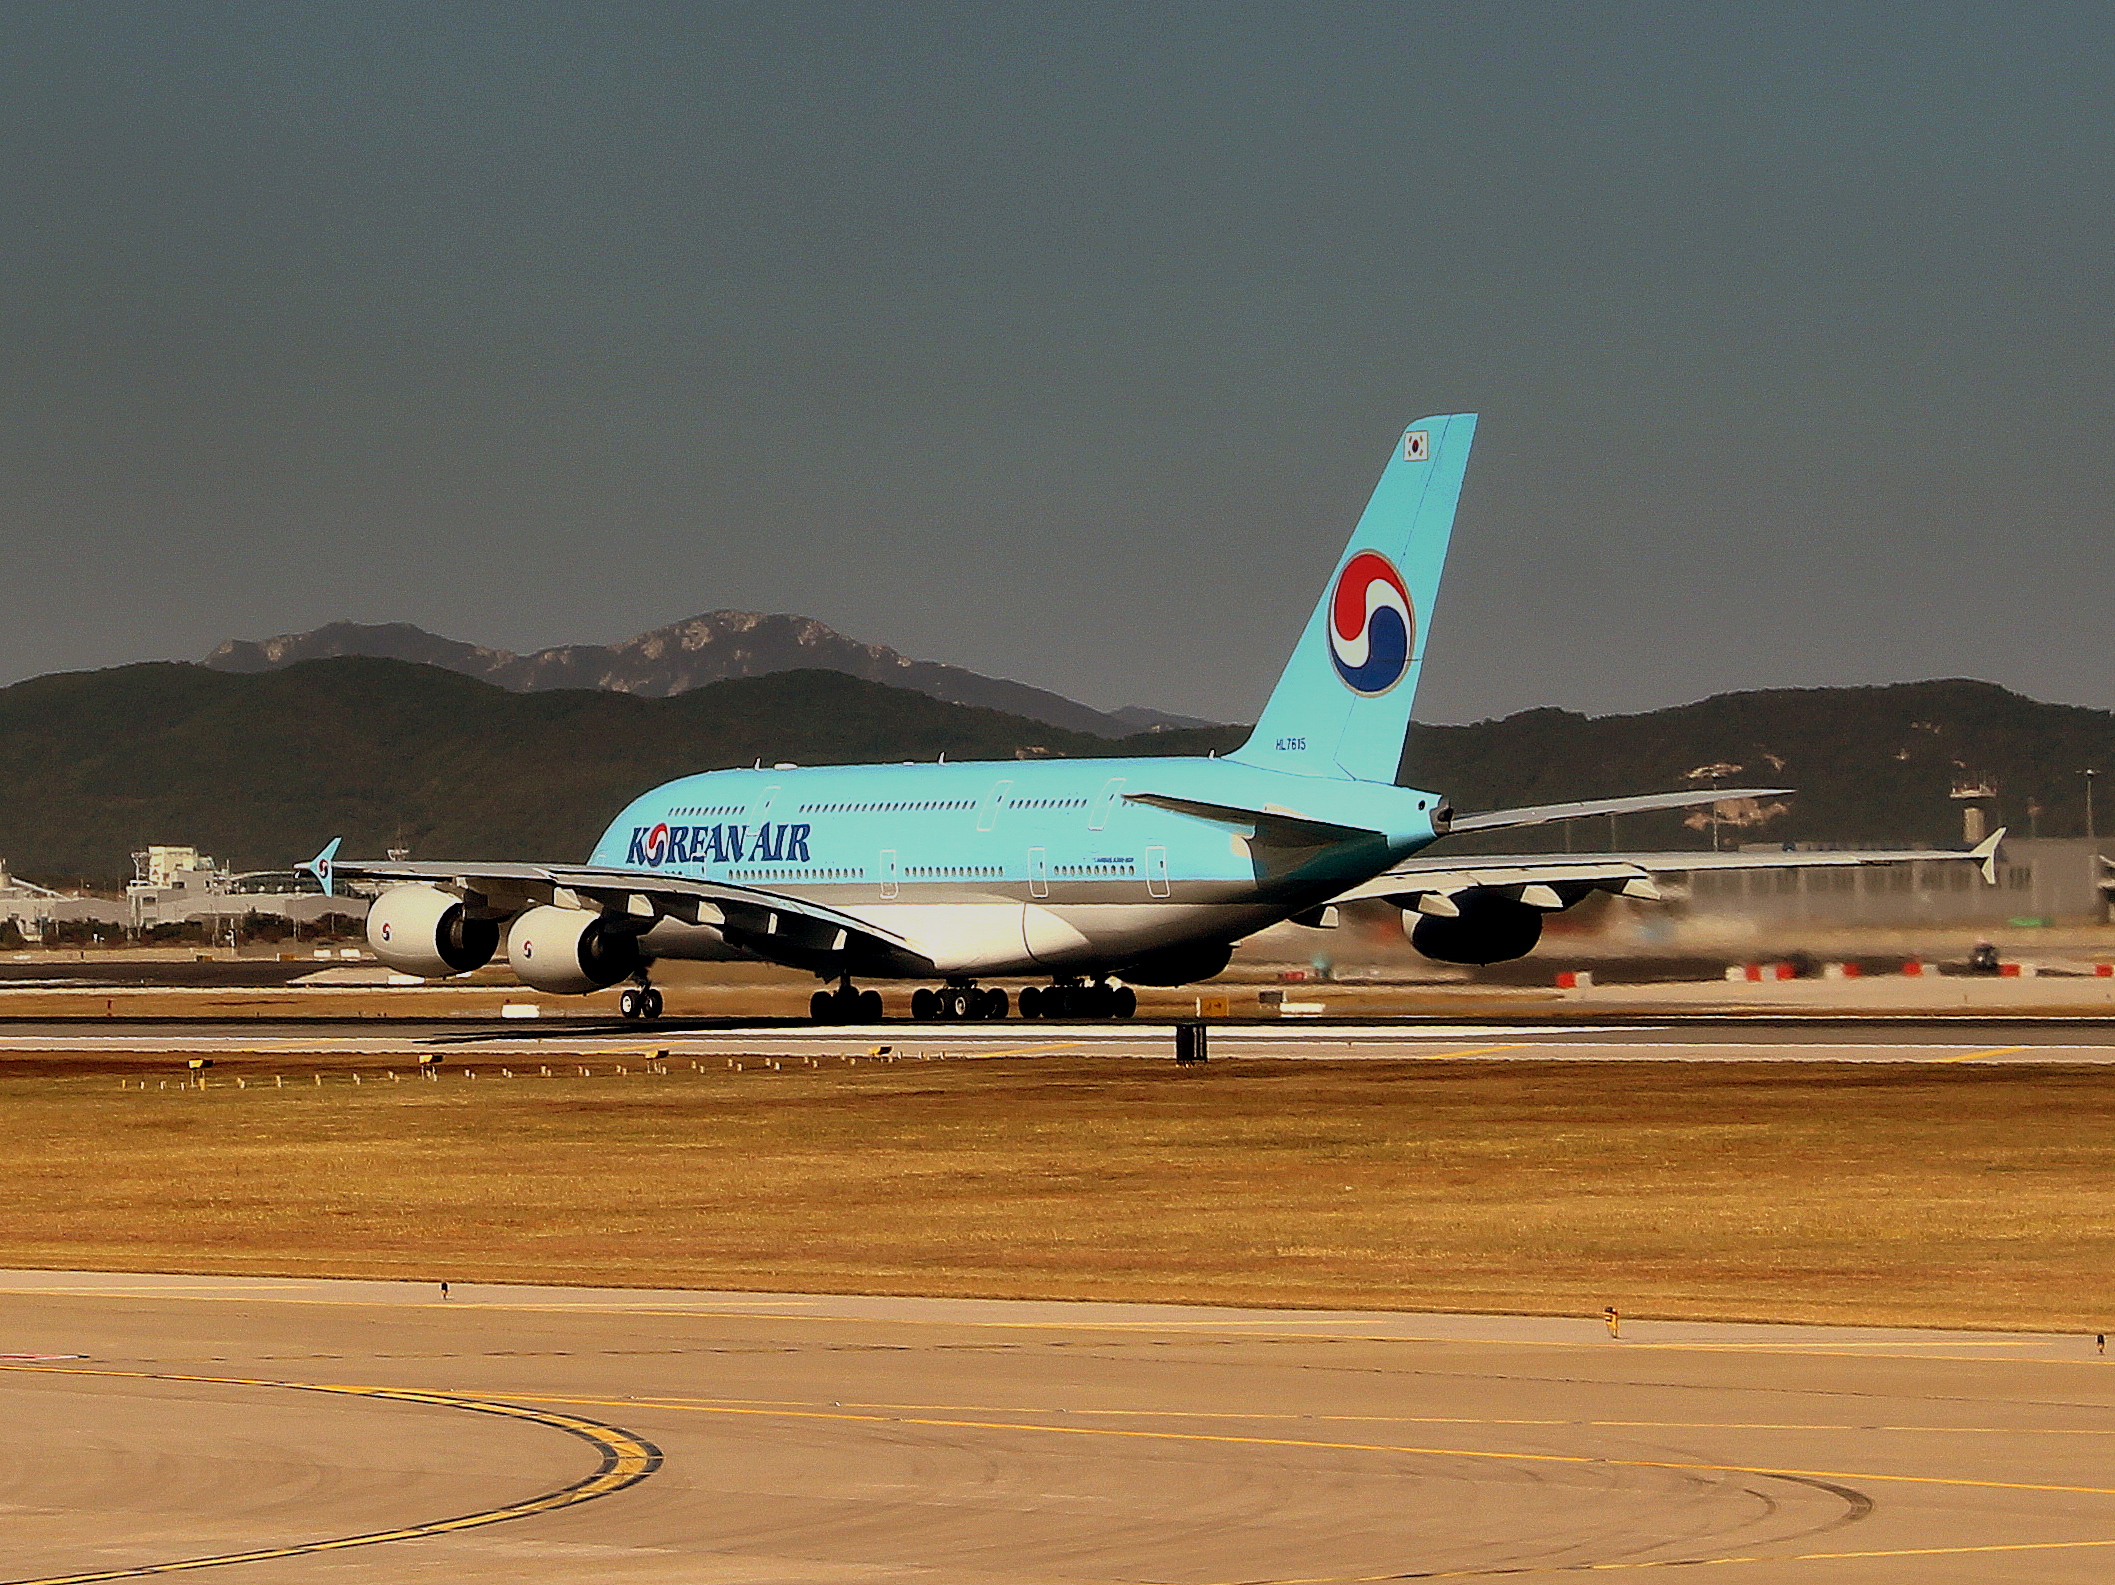 KOREAN AIR AIRBUS A380-800 ON DEPARTURE AT SEOUL INCHEON AIRPORT SOUTH KOREA OCT 2012 (8181849690)